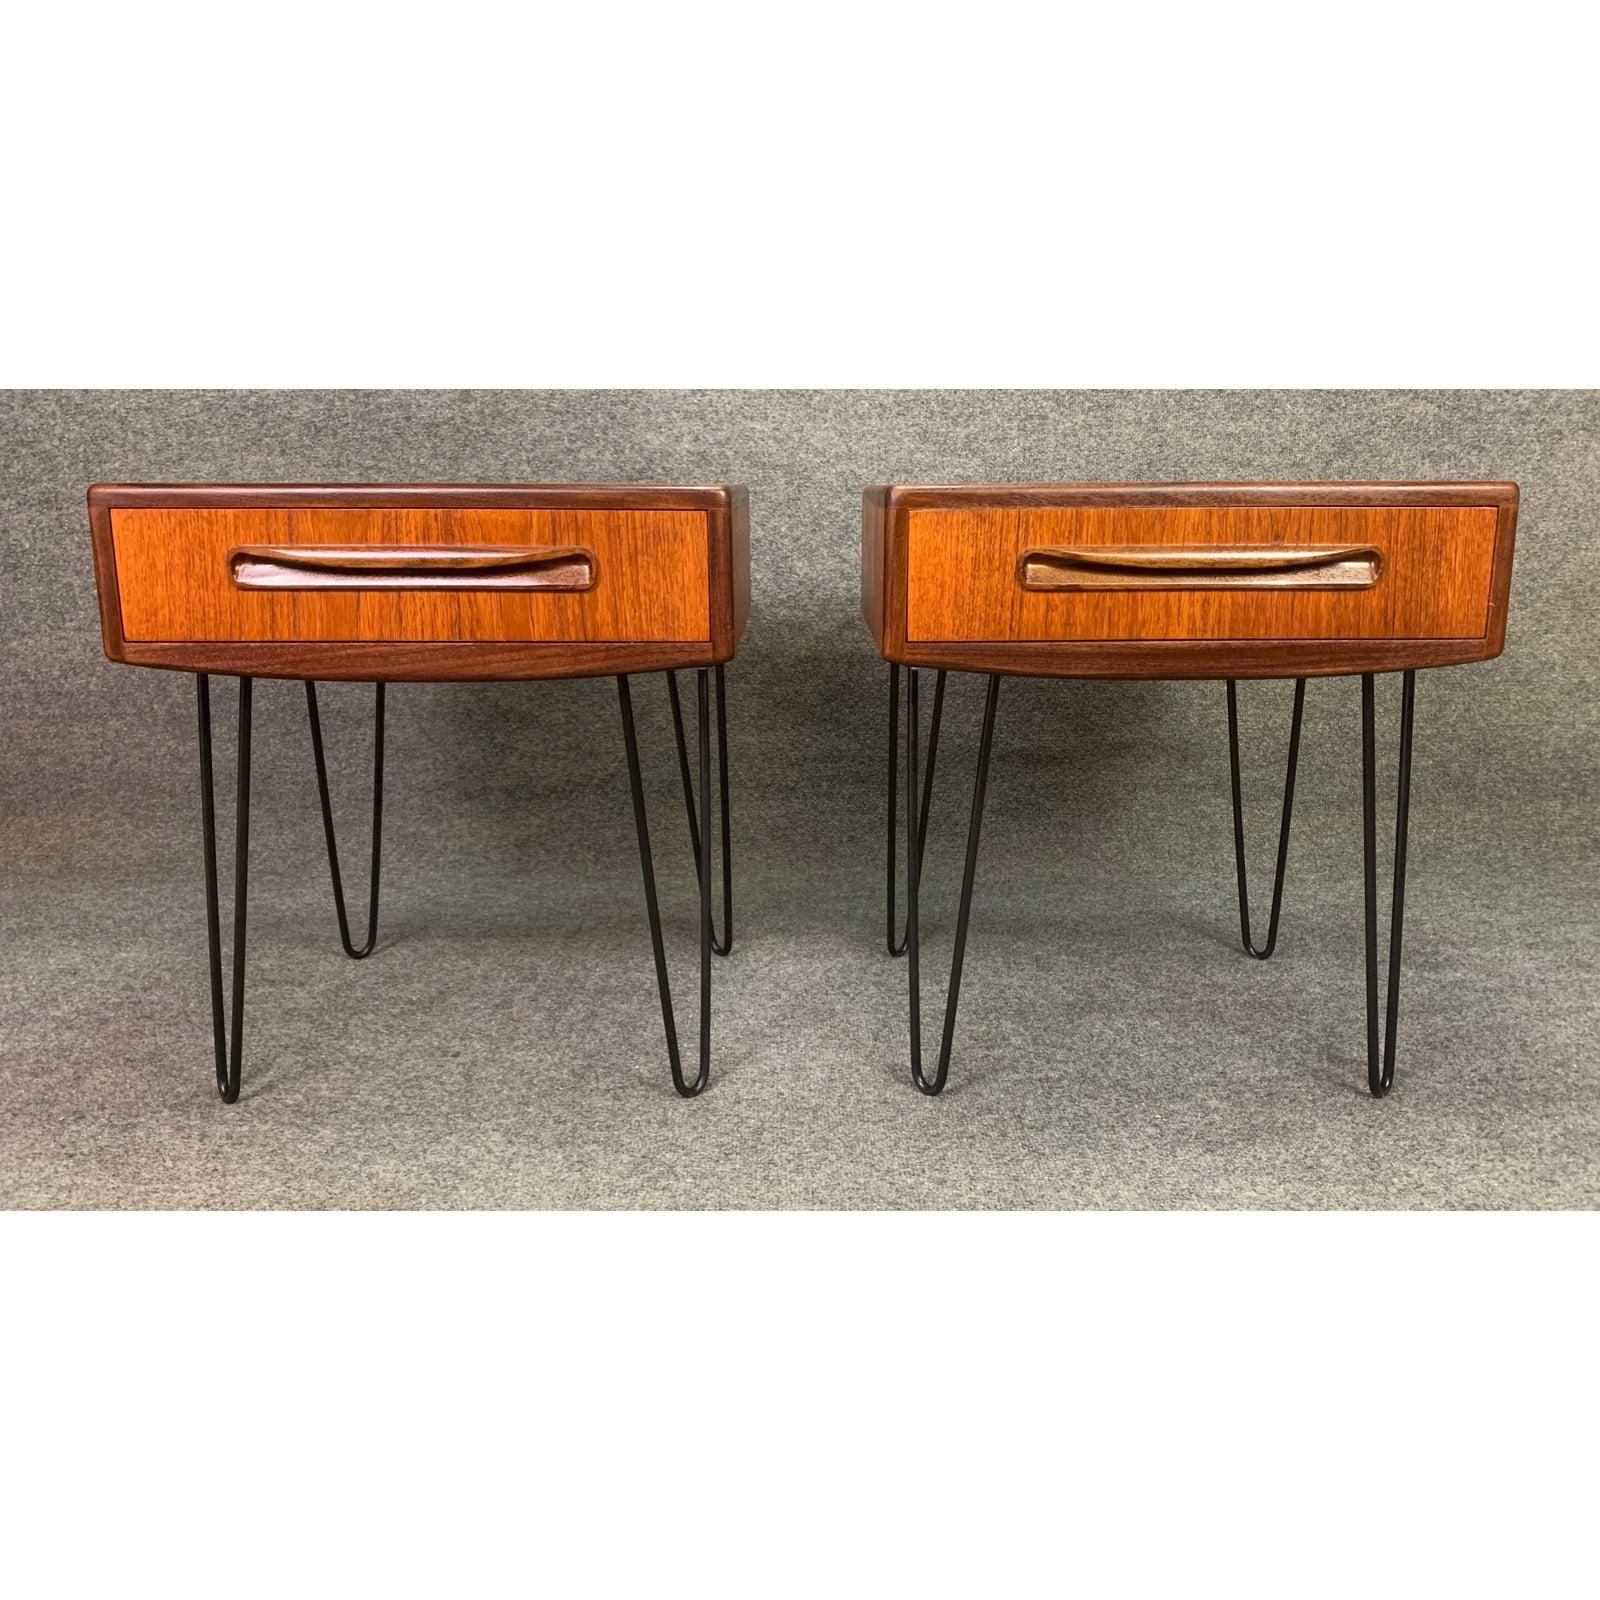 Here is a beautiful set of two 1960s Mid-Century Modern side tables, nightstands in teak wood designed by Victor Wilkins and manufactured by G Plan in England.
This pair, recently imported from UK to California before their restoration, features a